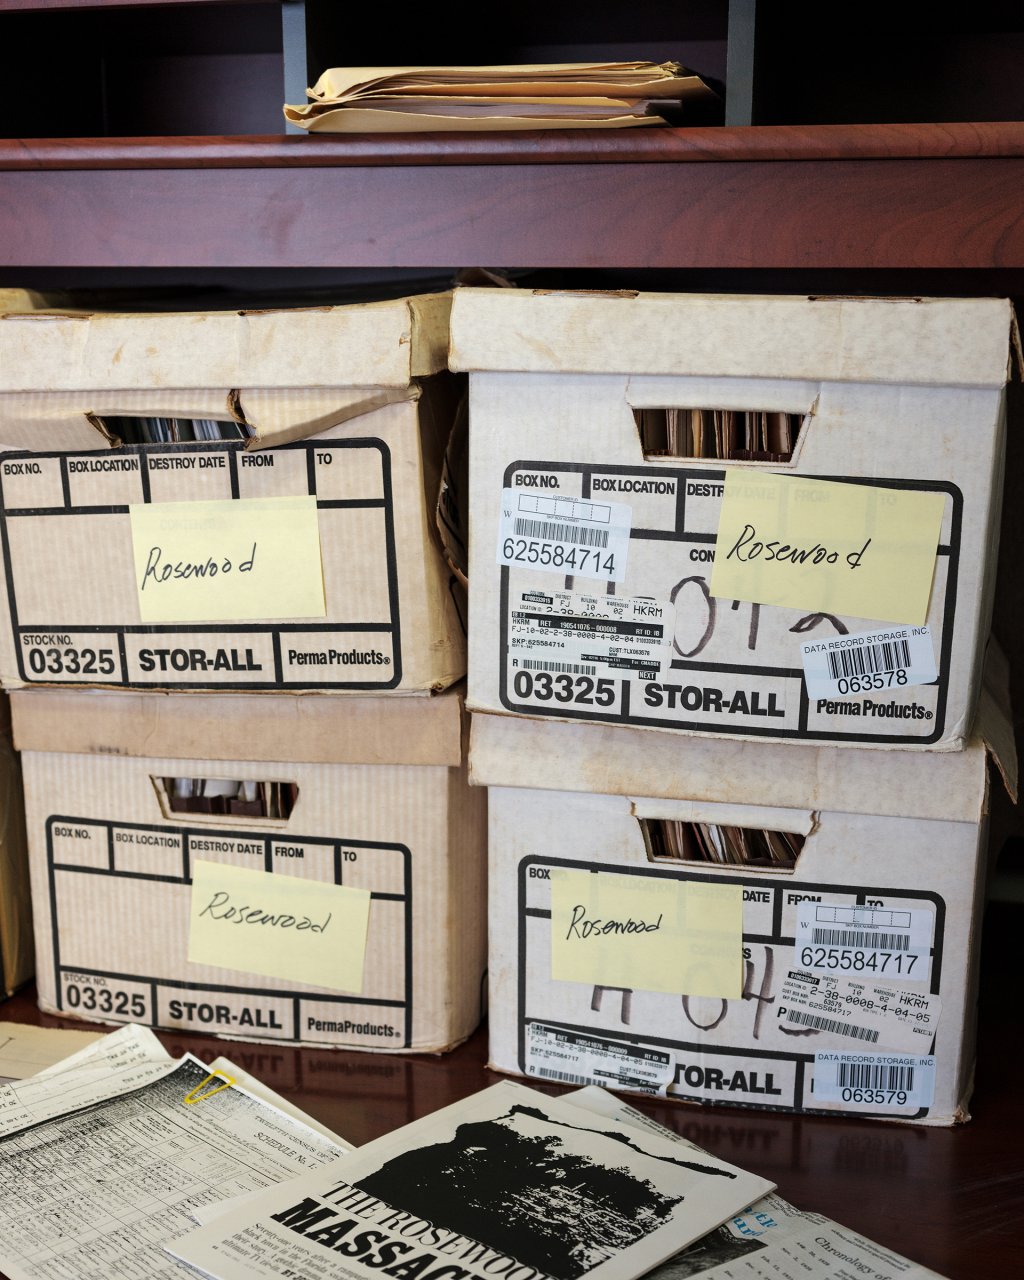 Boxes of Rosewood files at Barnett's office.